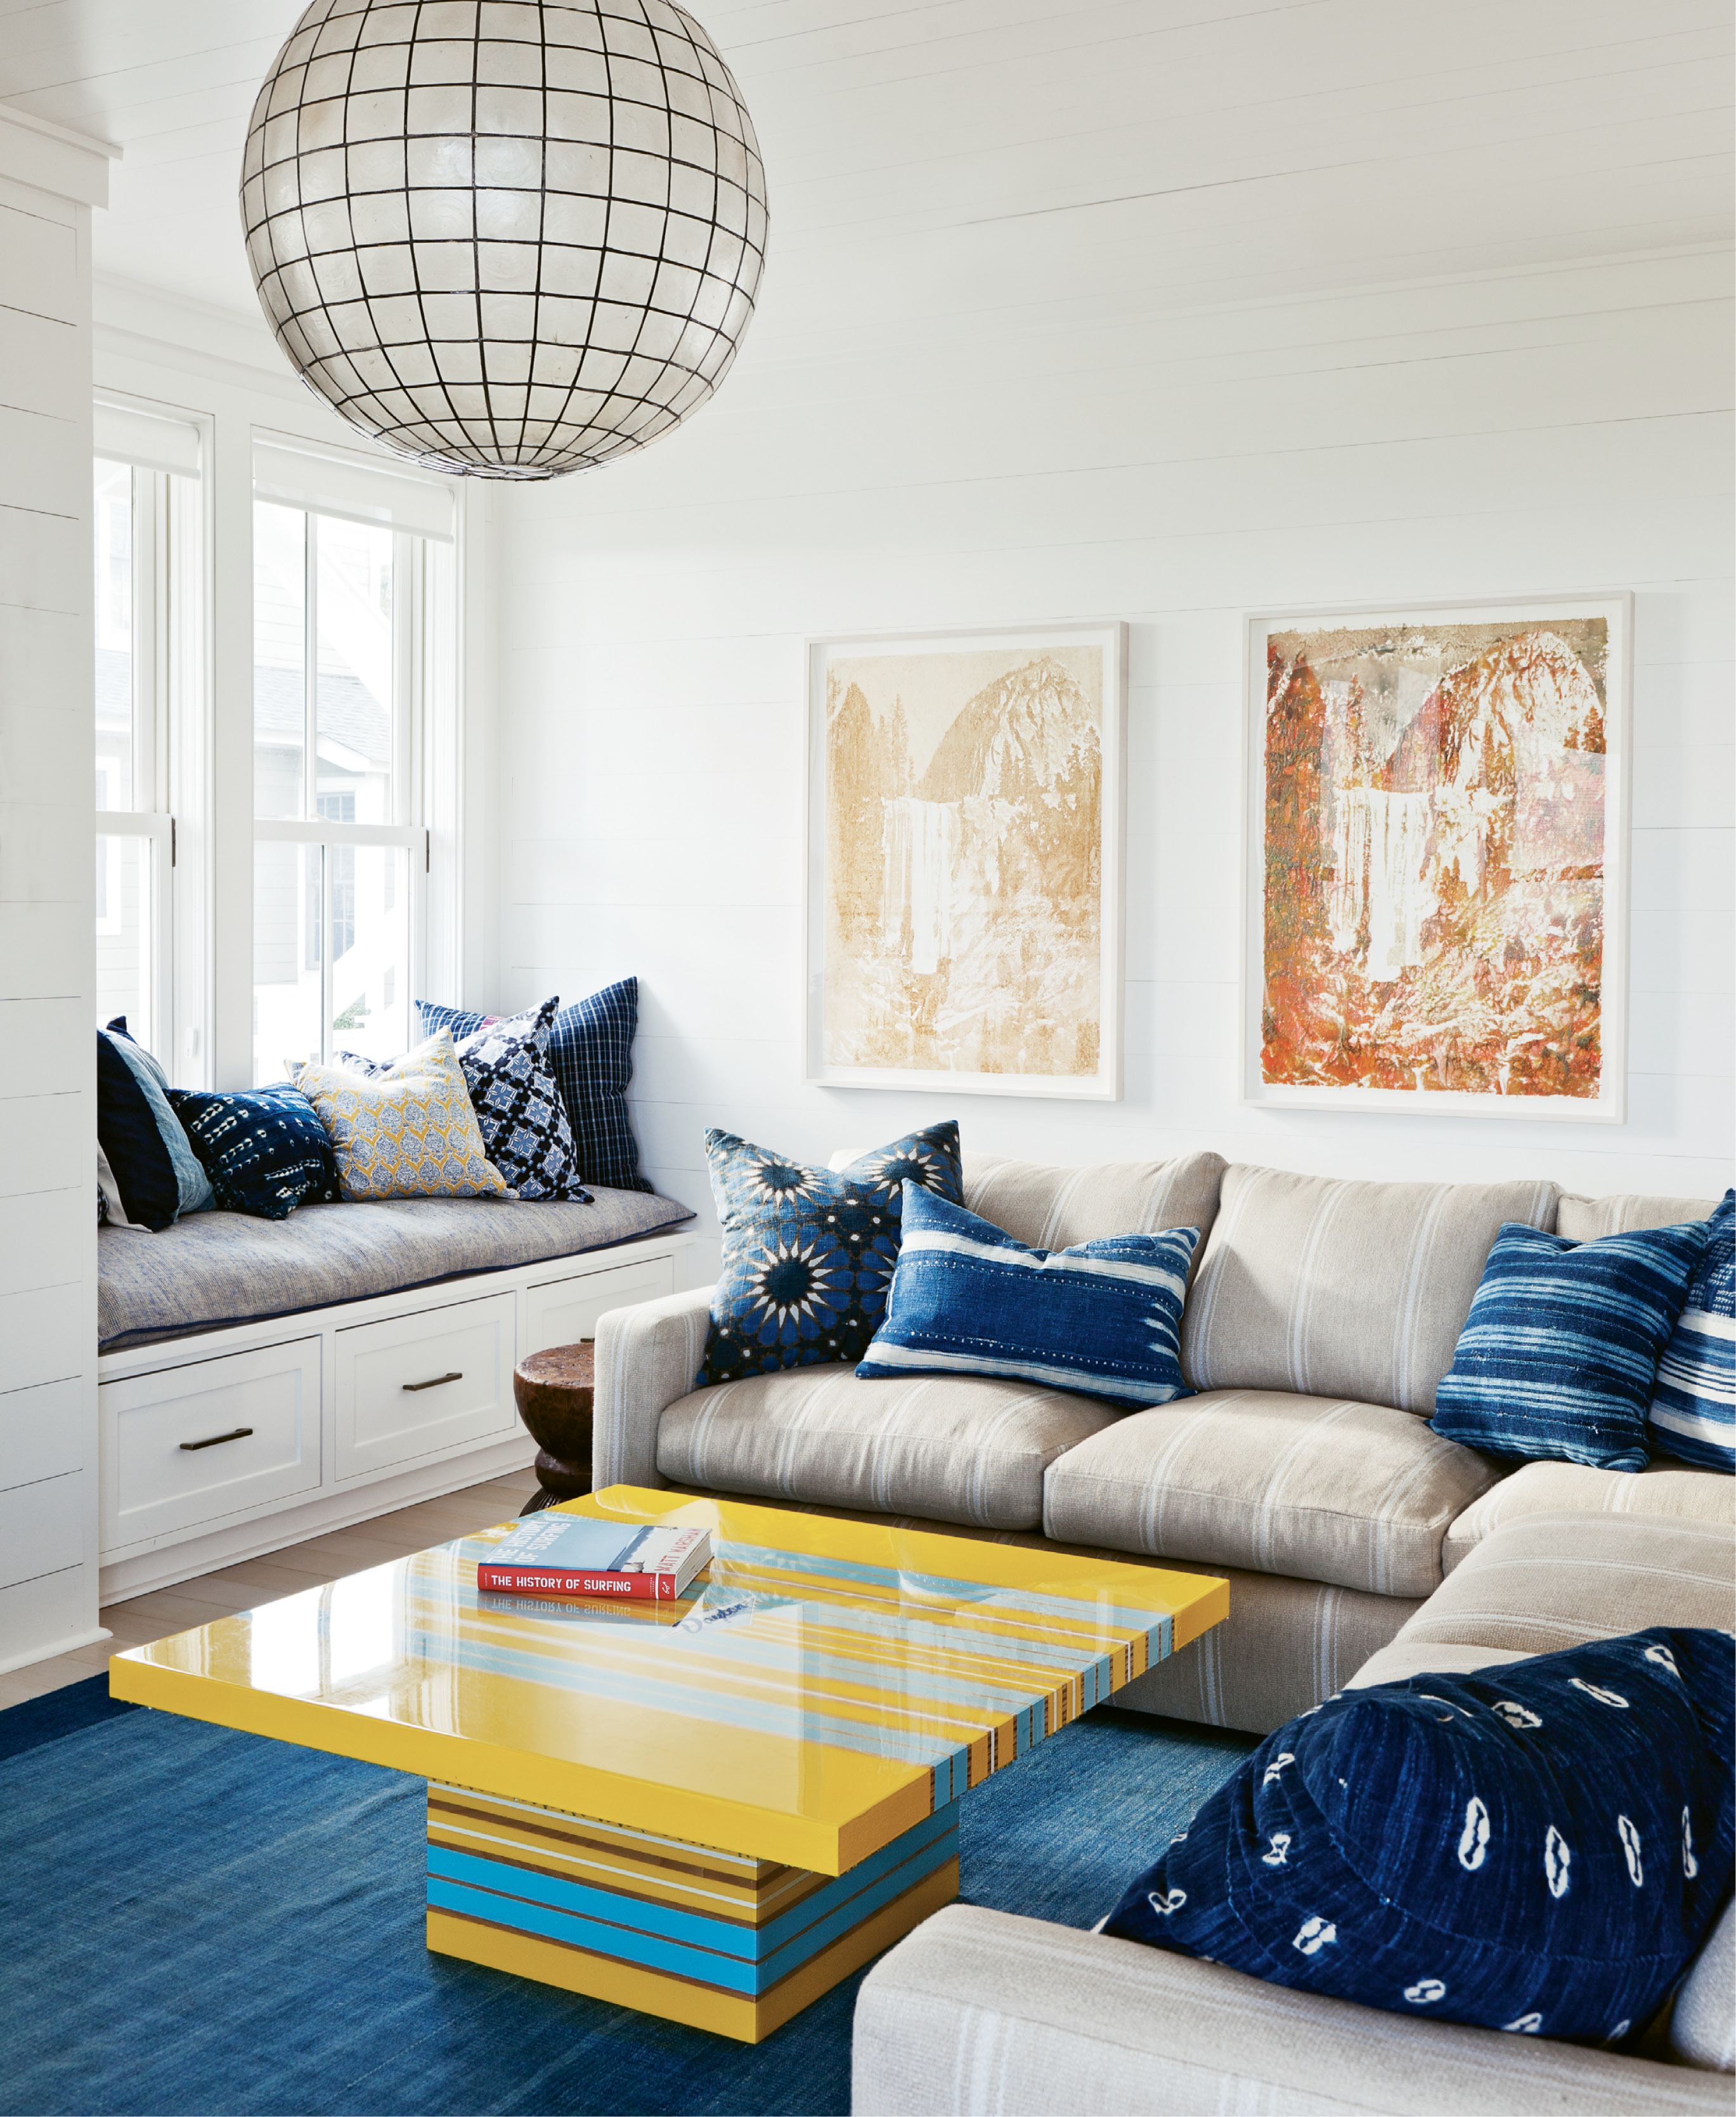 Surf’s Up: The family room is a primo spot with a bright yellow and blue surfboard-inspired coffee table. Delicious artwork by Matthew Brandt is made of Gummi Bears and Pixy Stixs.